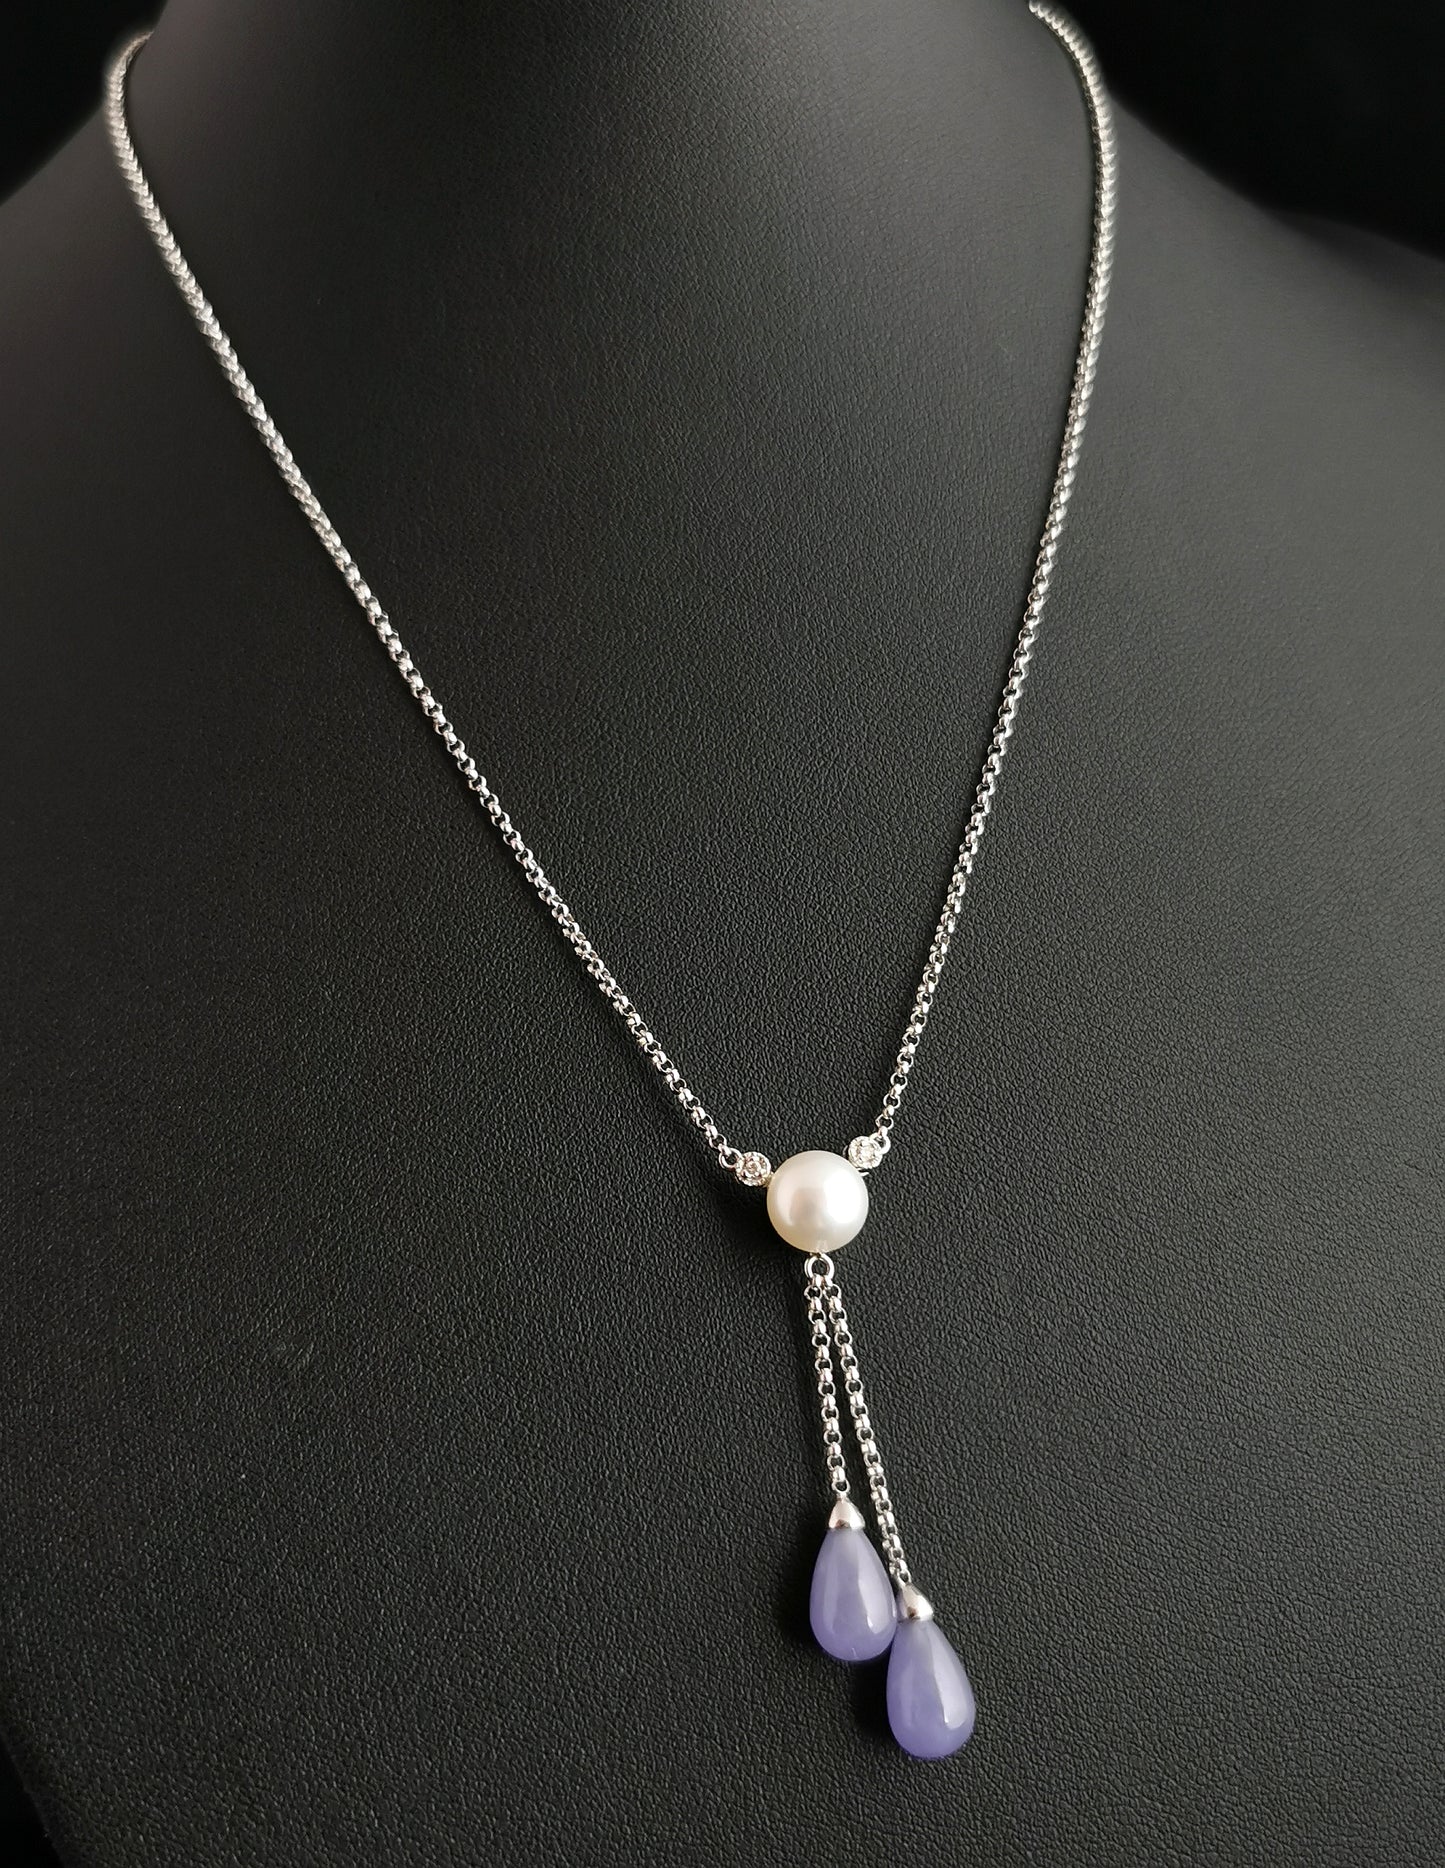 Vintage Art Deco style lariat necklace, Diamond, Pearl and Lavender Jade, 14ct white gold